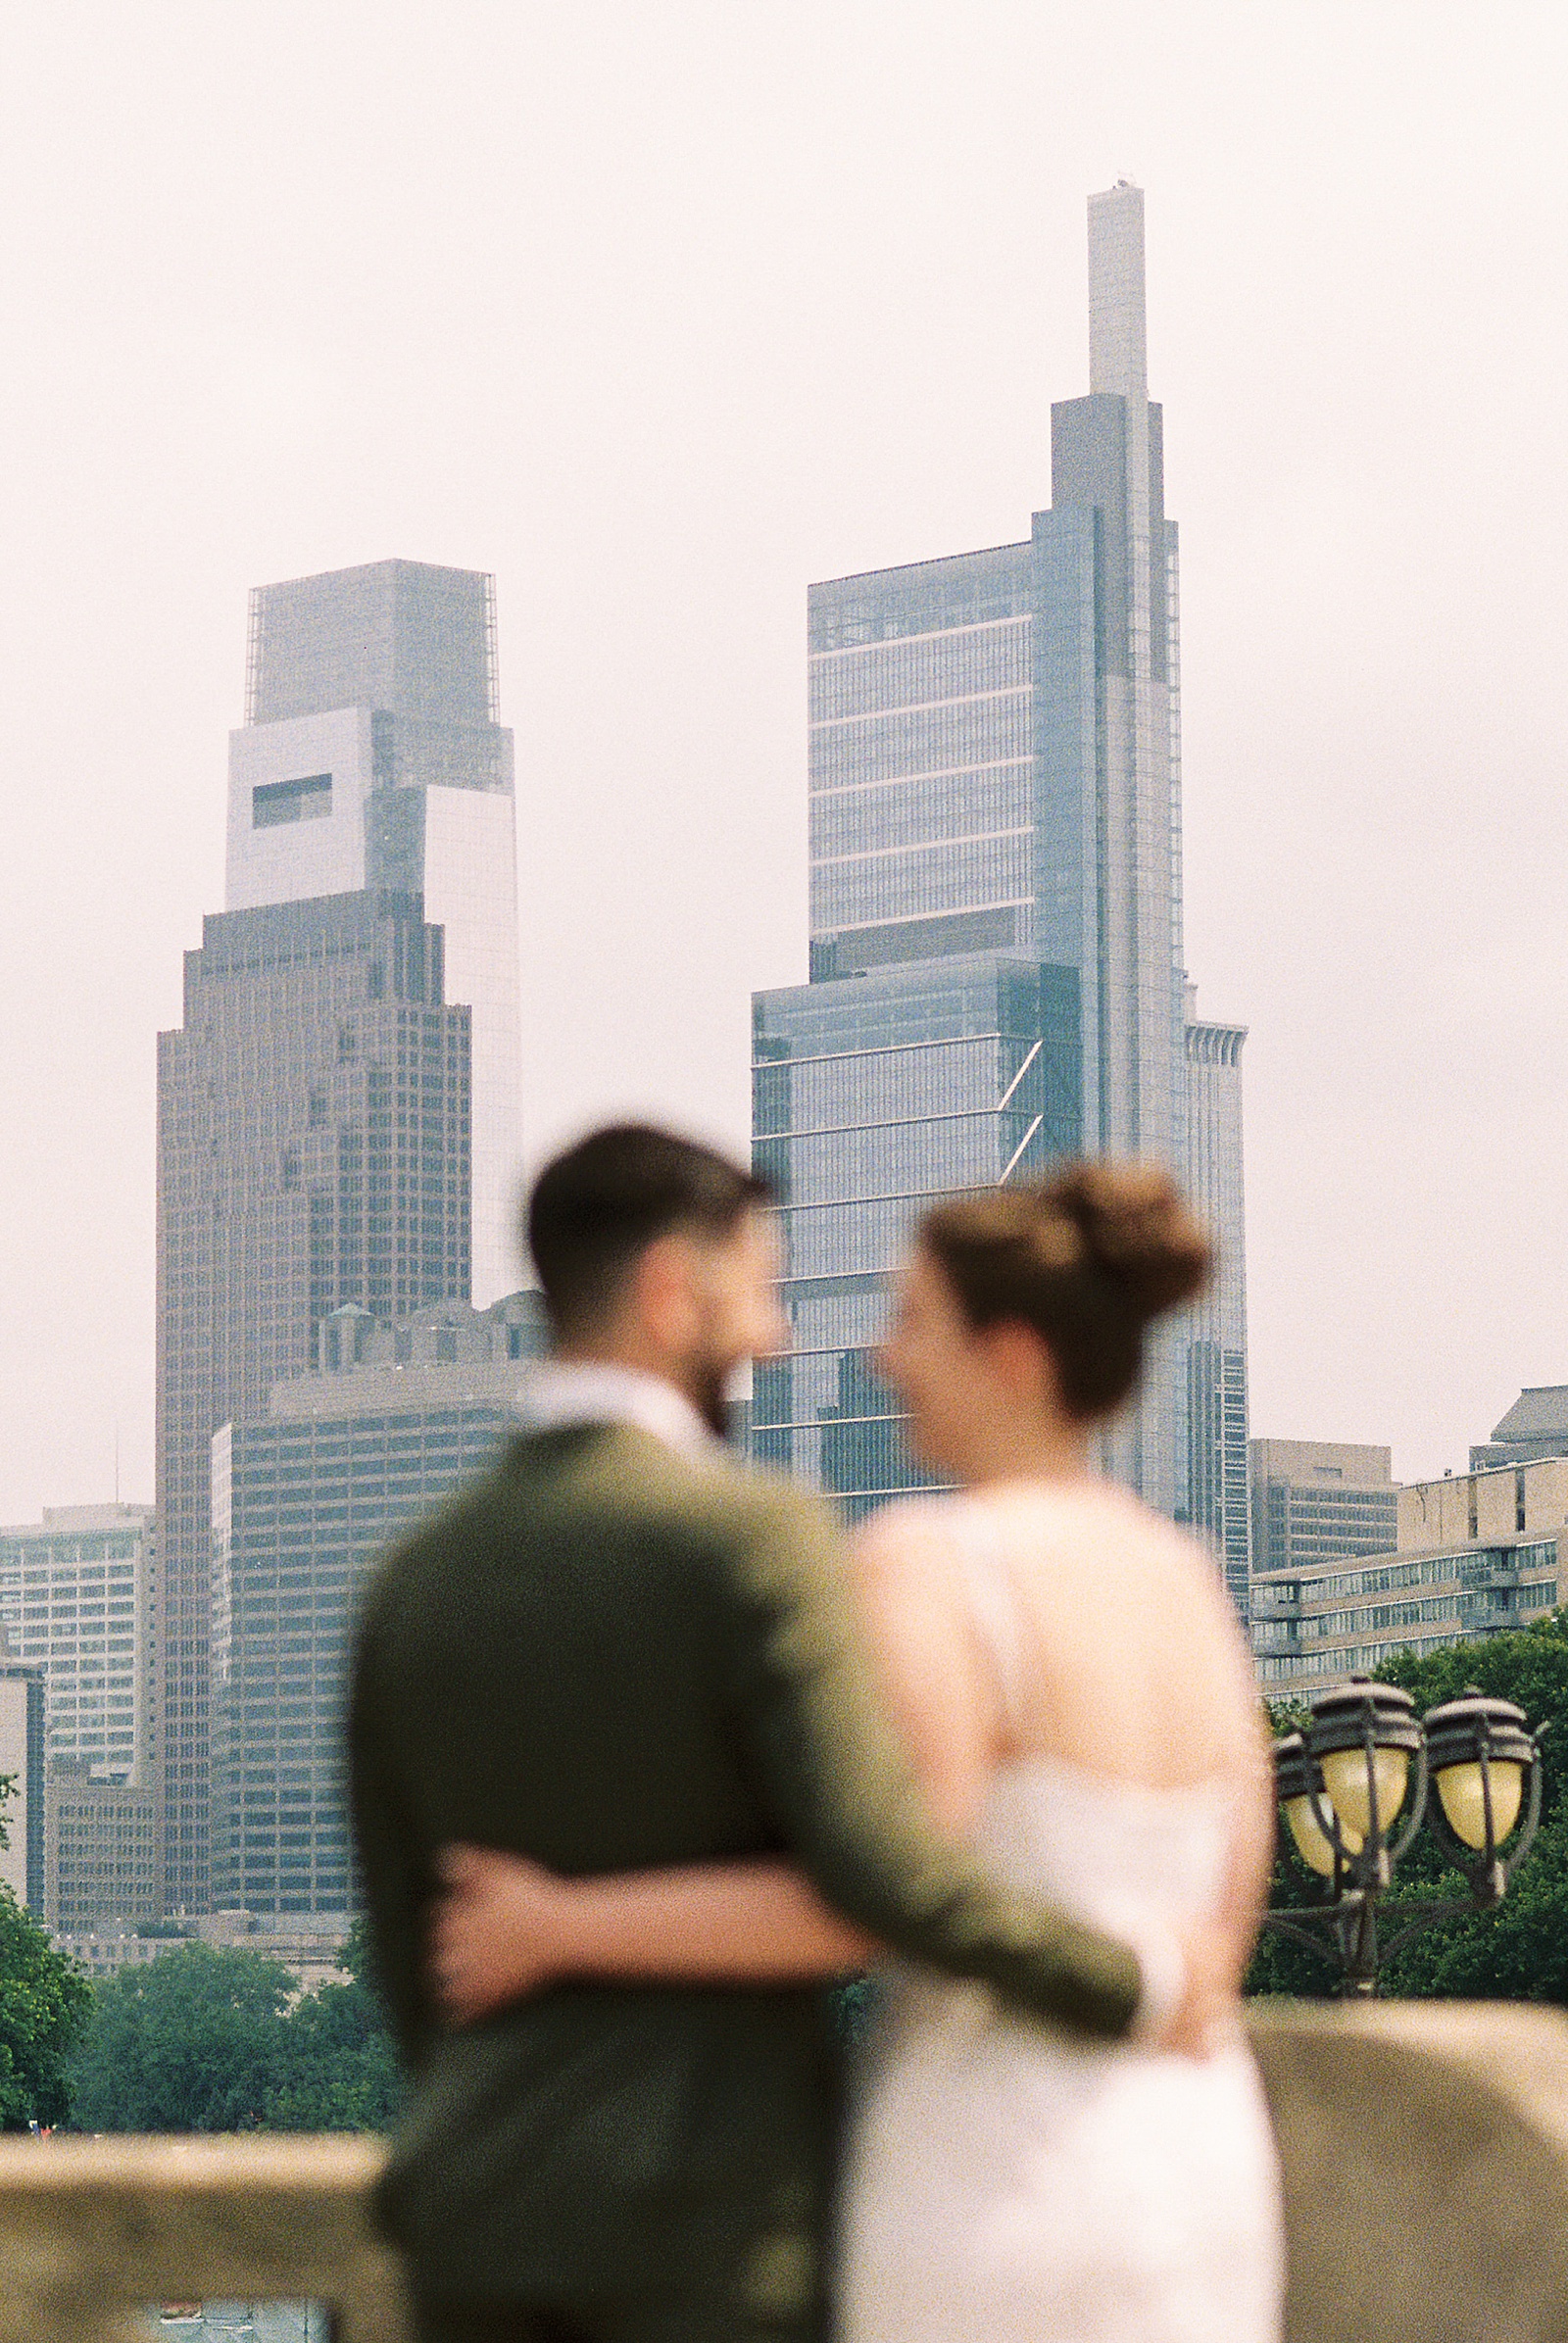 A film wedding photo shows a bride and groom out of focus in the foreground in front of the Philadelphia skyline.